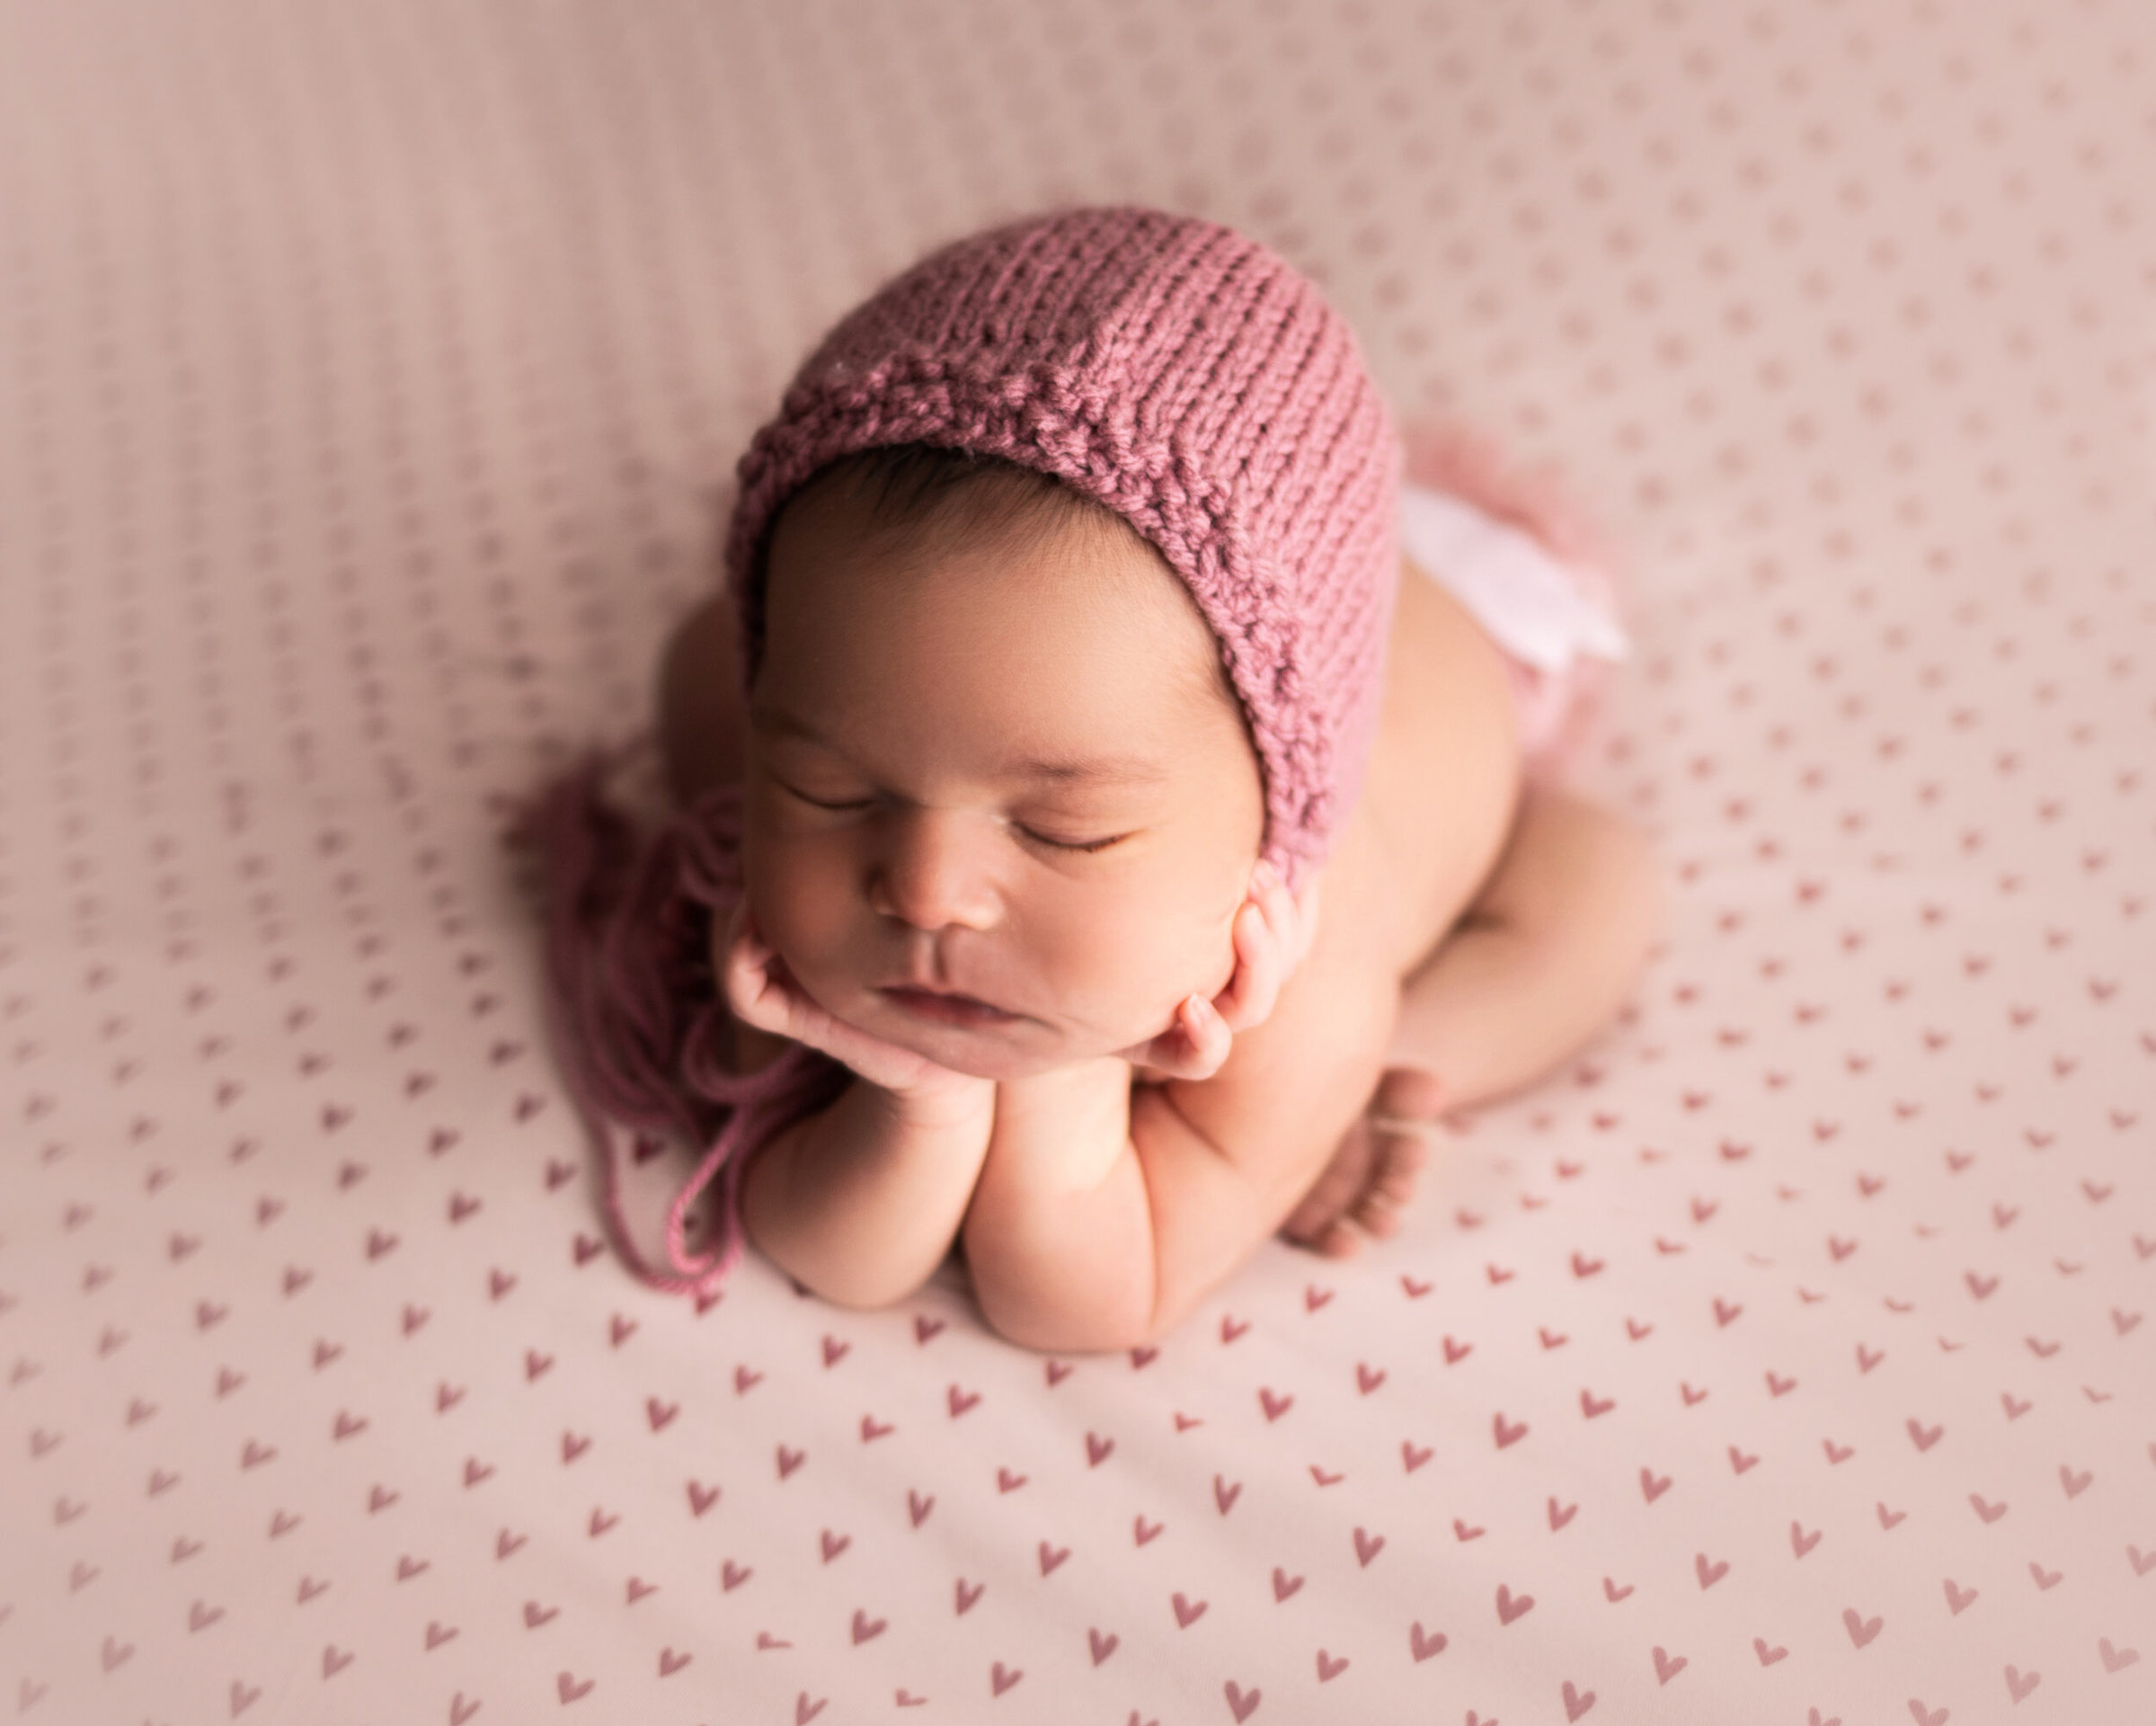 newborn girl on heart backdrop in froggy pose with pink bonnet by baby photographer in Minneapolis mn